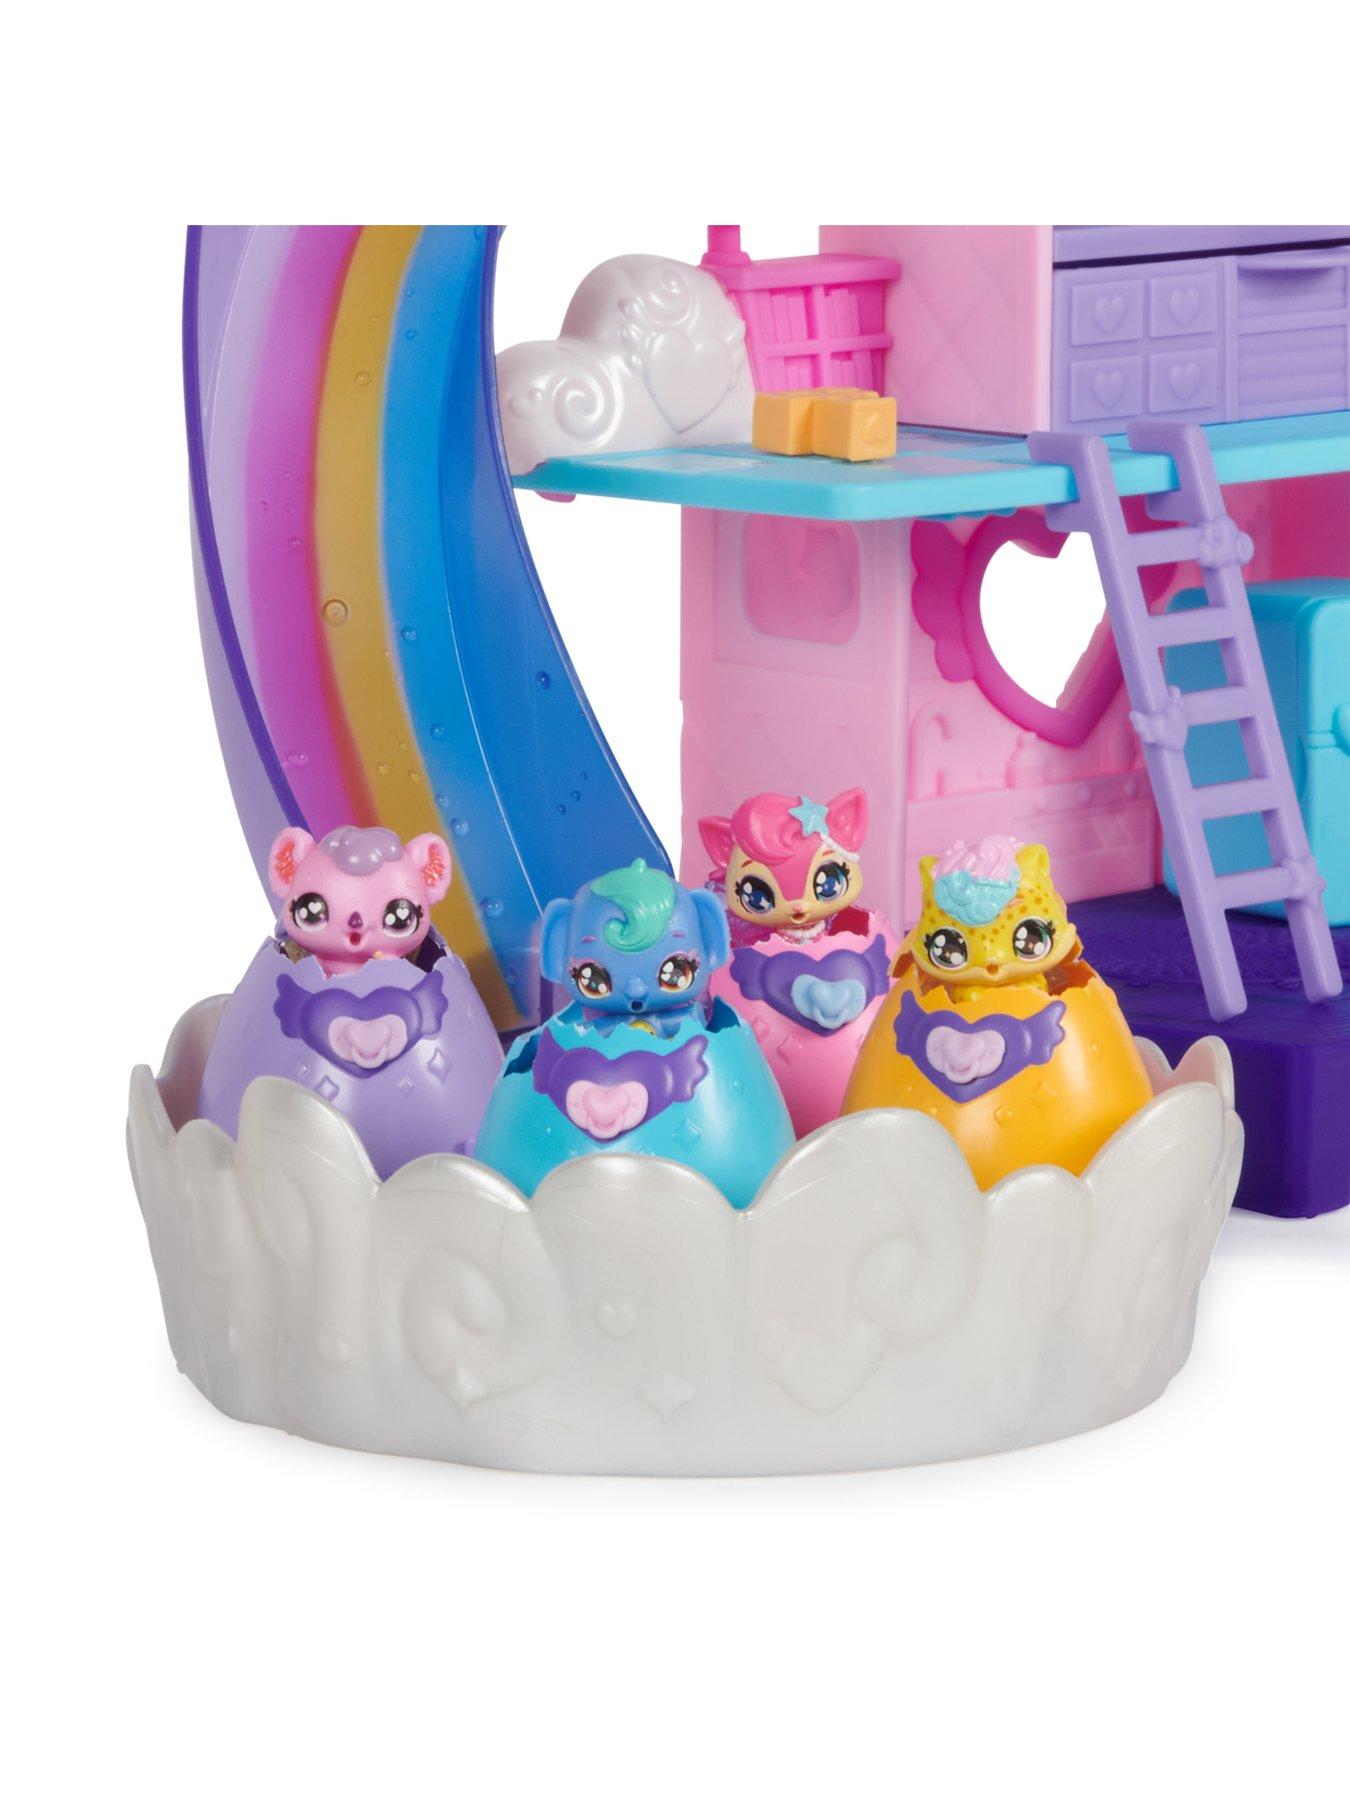  Hatchimals Alive, Hungry Playset with Highchair Toy and 2 Mini  Figures in Self-Hatching Eggs, Kids Toys for Girls and Boys Ages 3 and up :  Everything Else